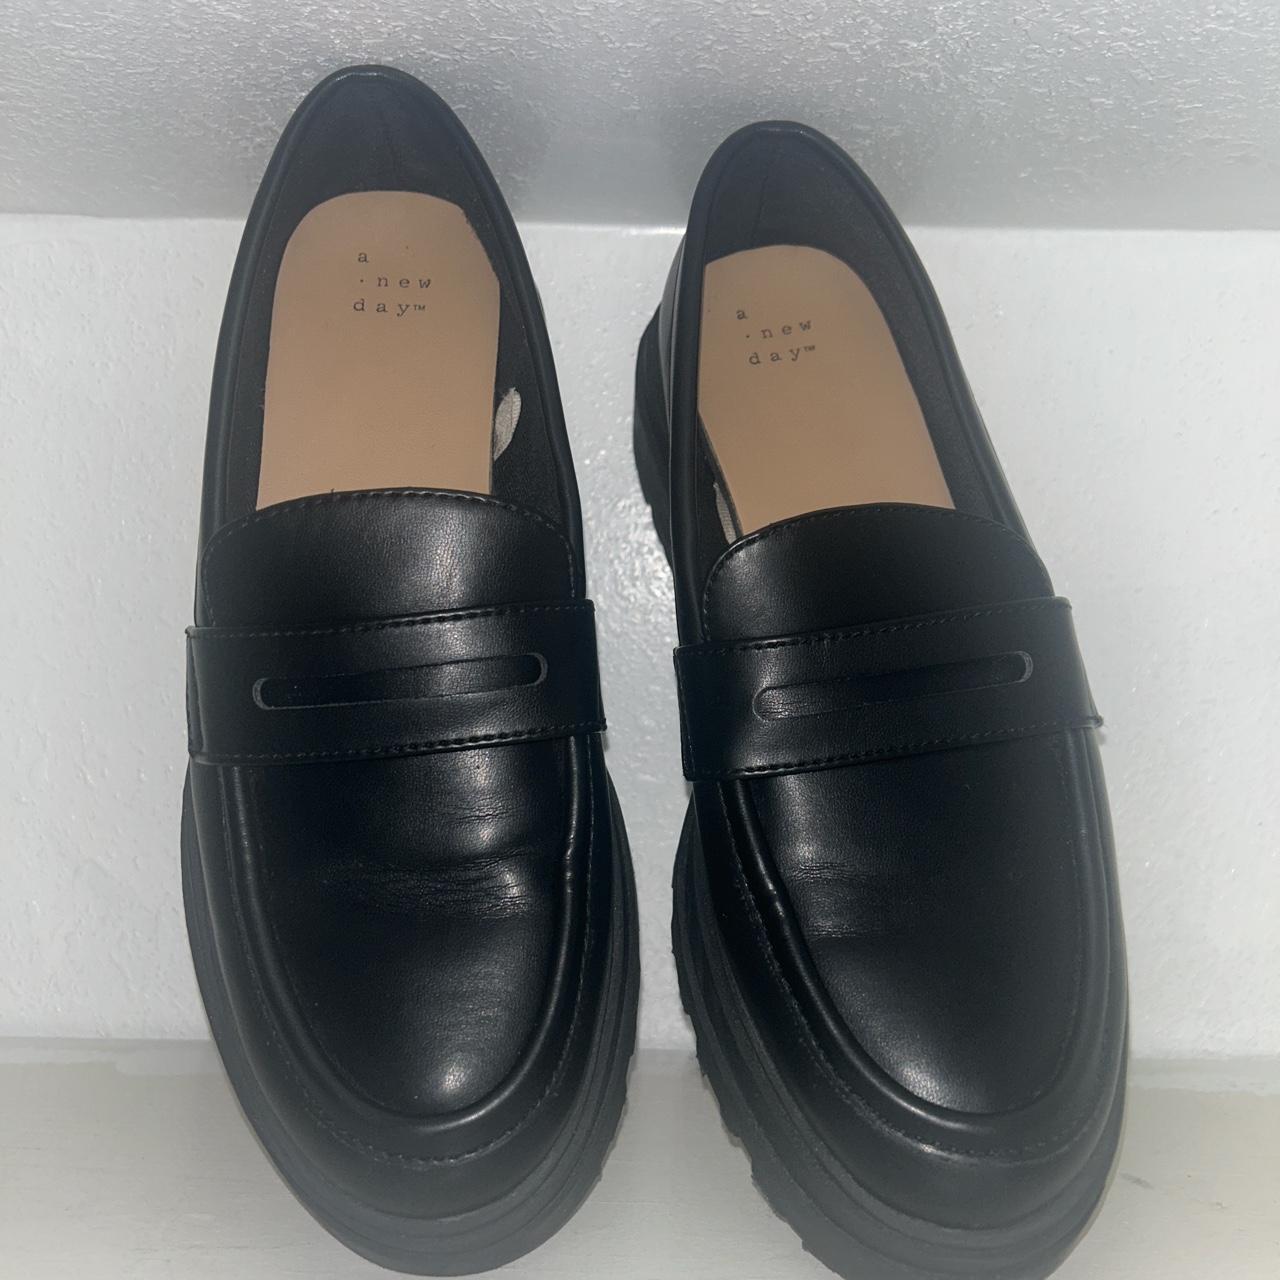 A New Day Women's Black Loafers (5)